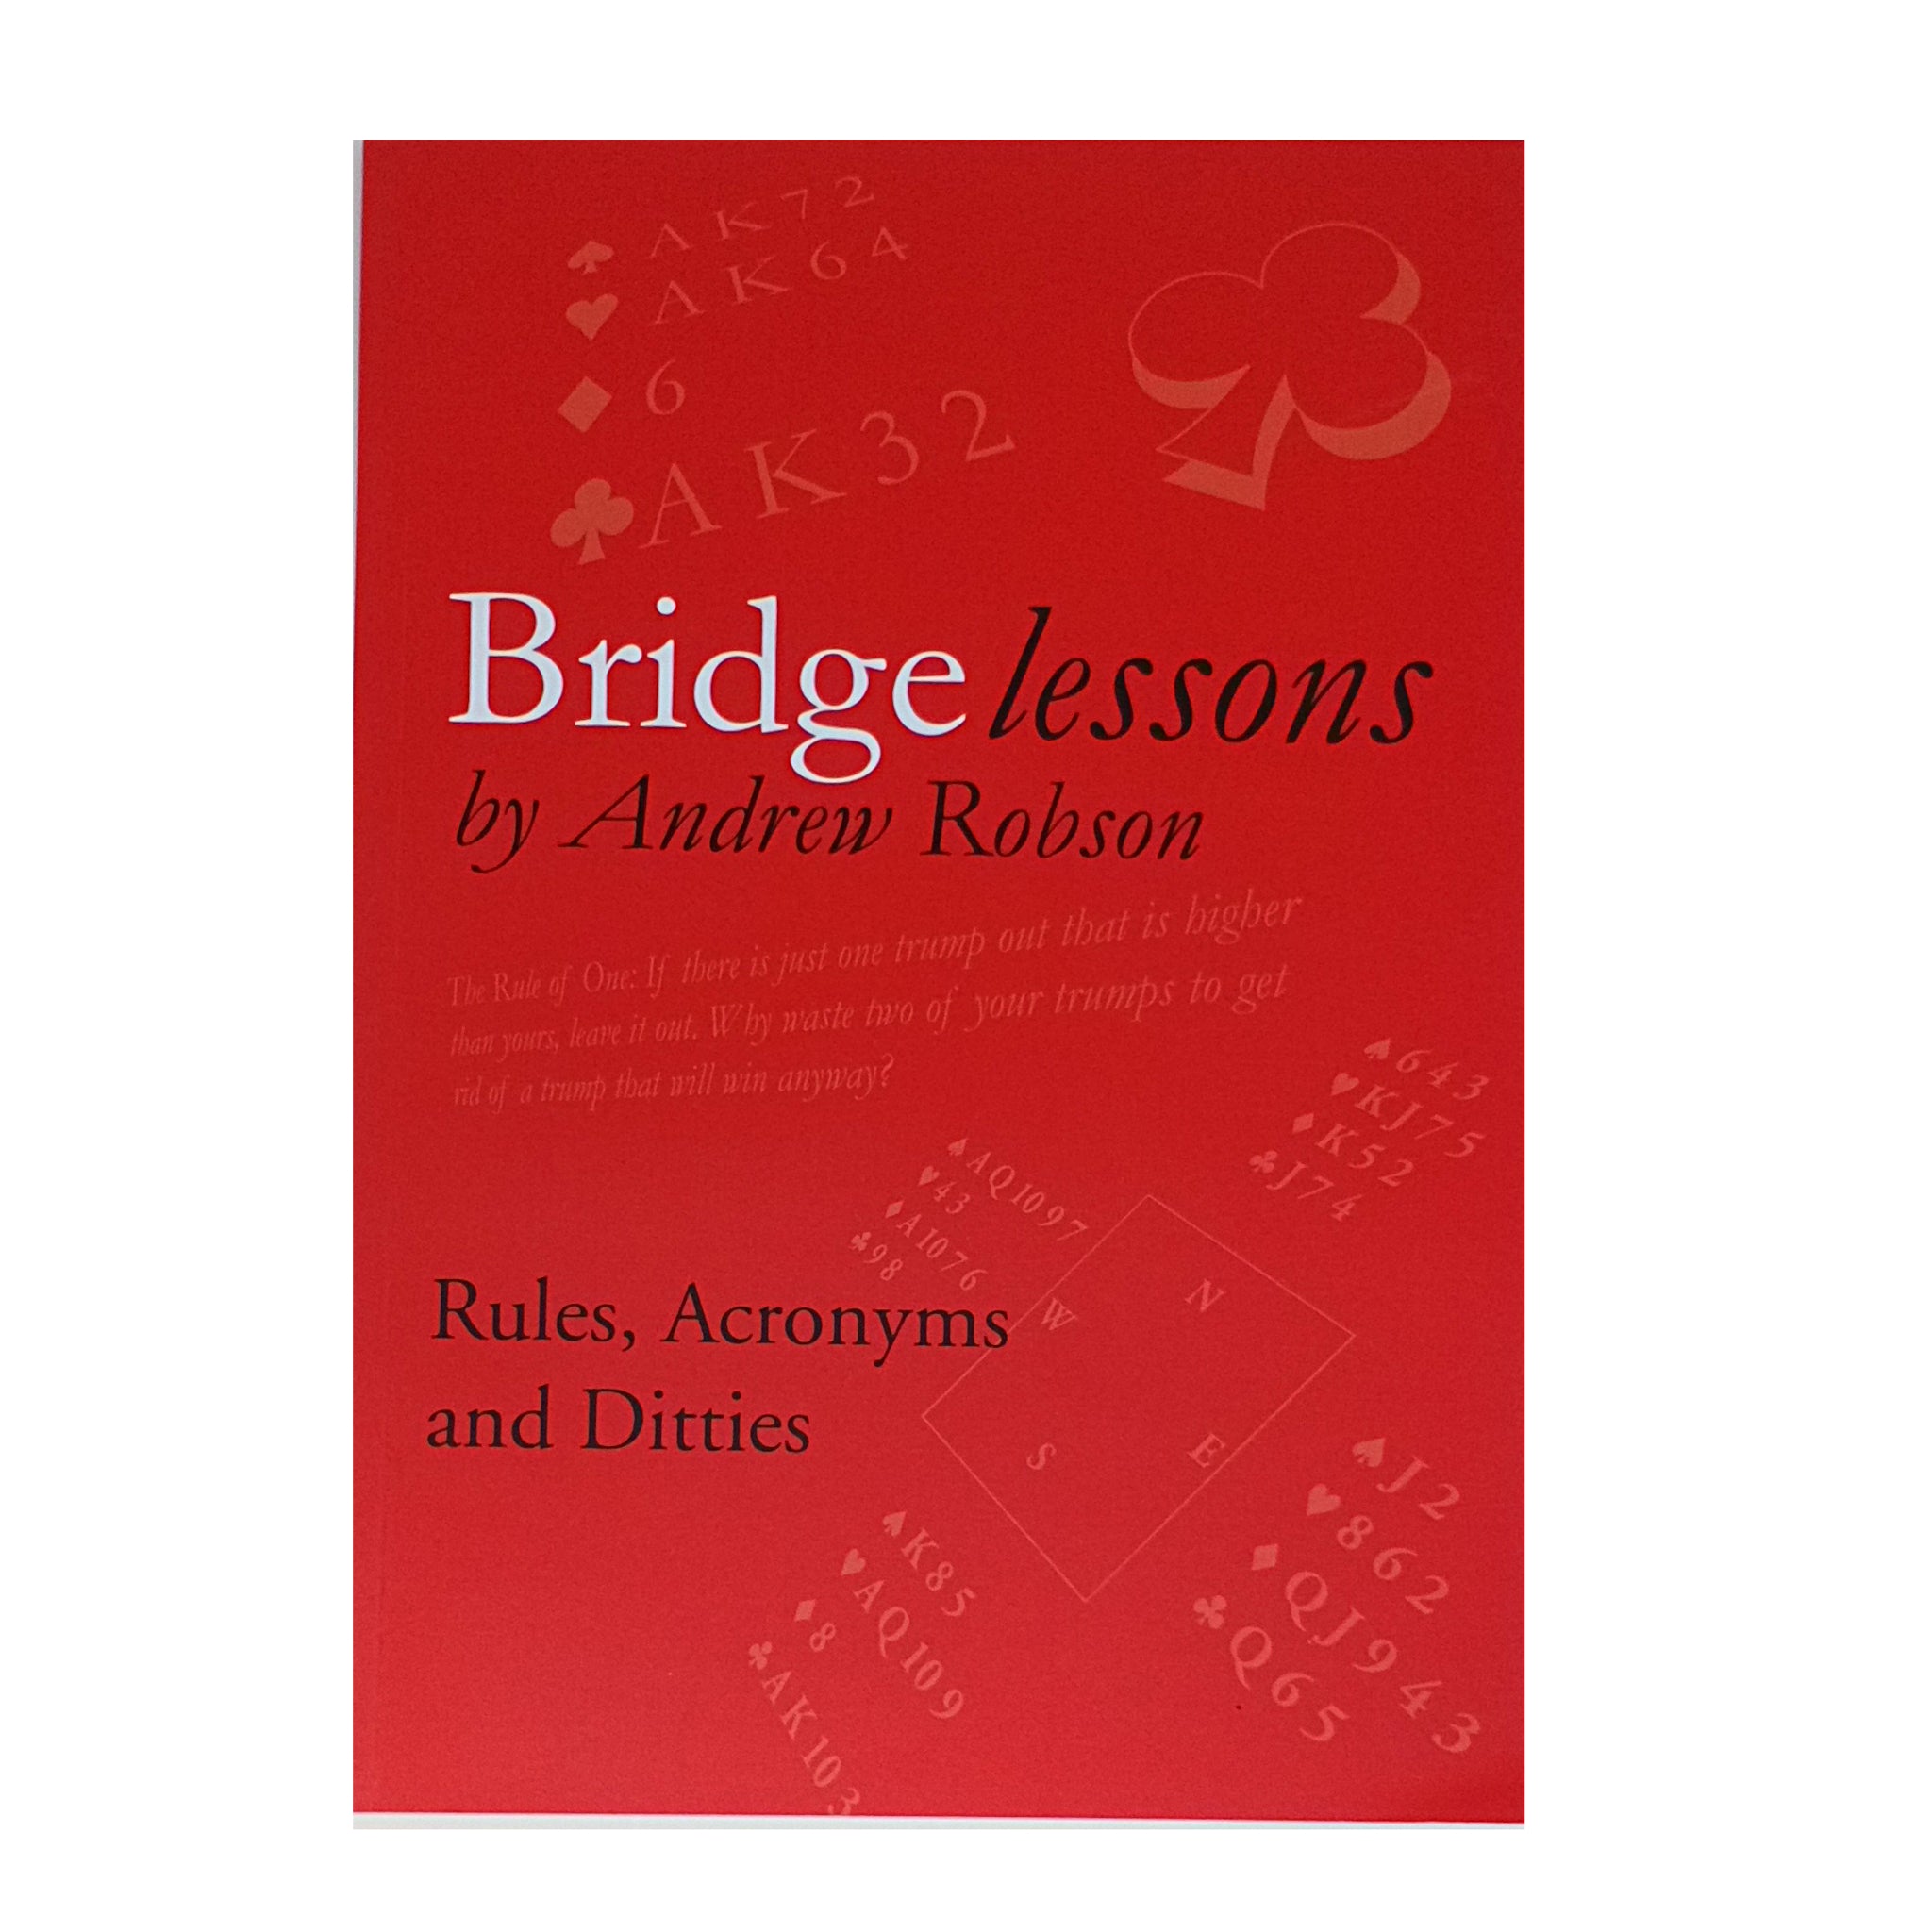 Bridge Lessons: Rules, Acronyms and Ditties